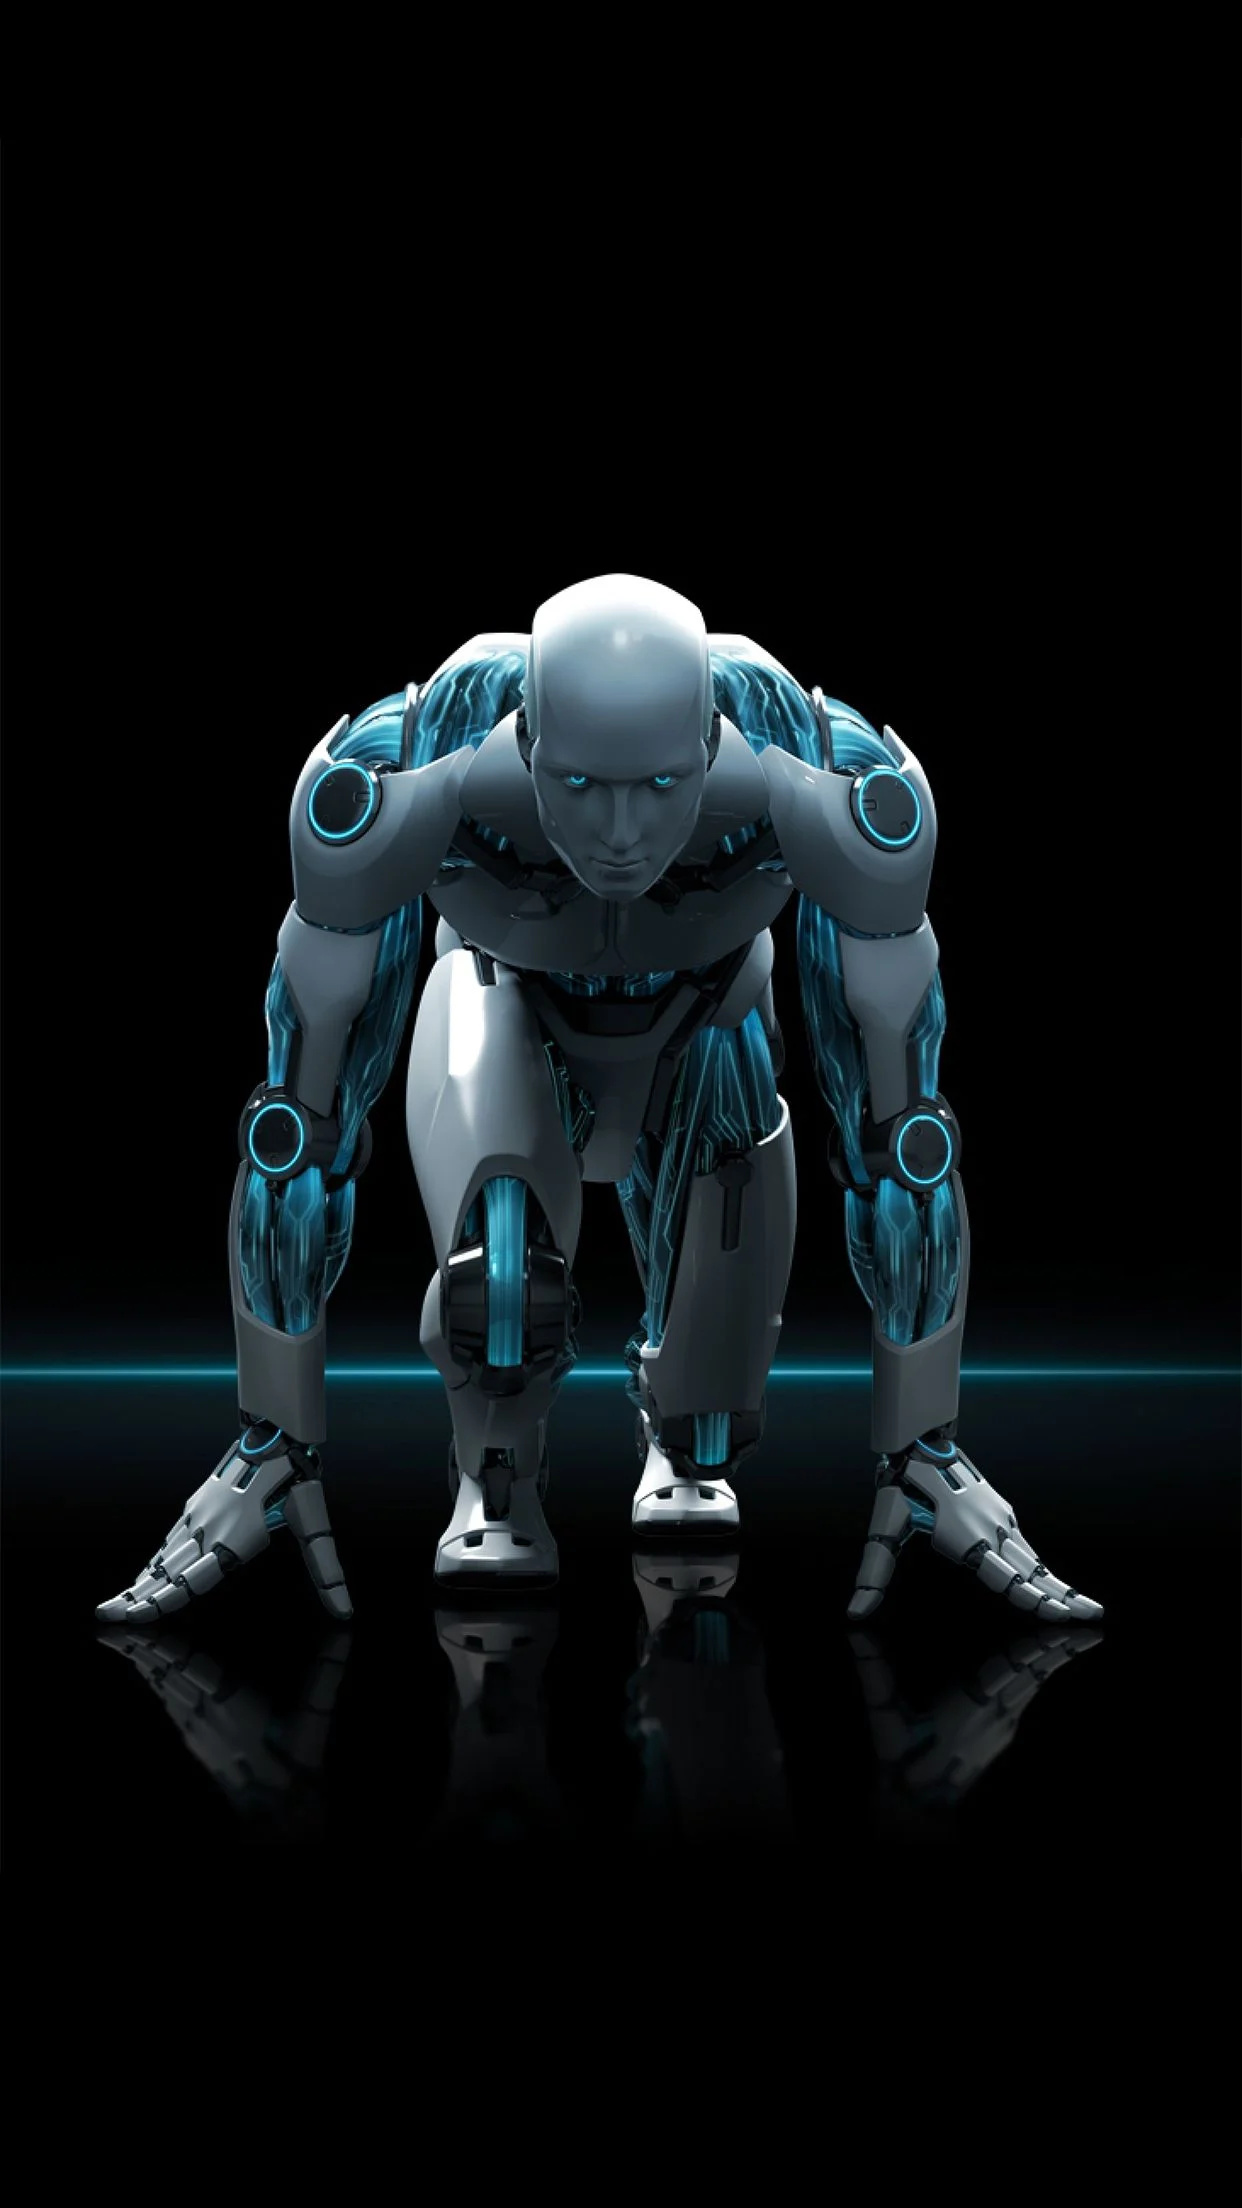 Robot other, Robot iPhone wallpapers, Futuristic designs, Technological marvels, 1250x2210 HD Phone